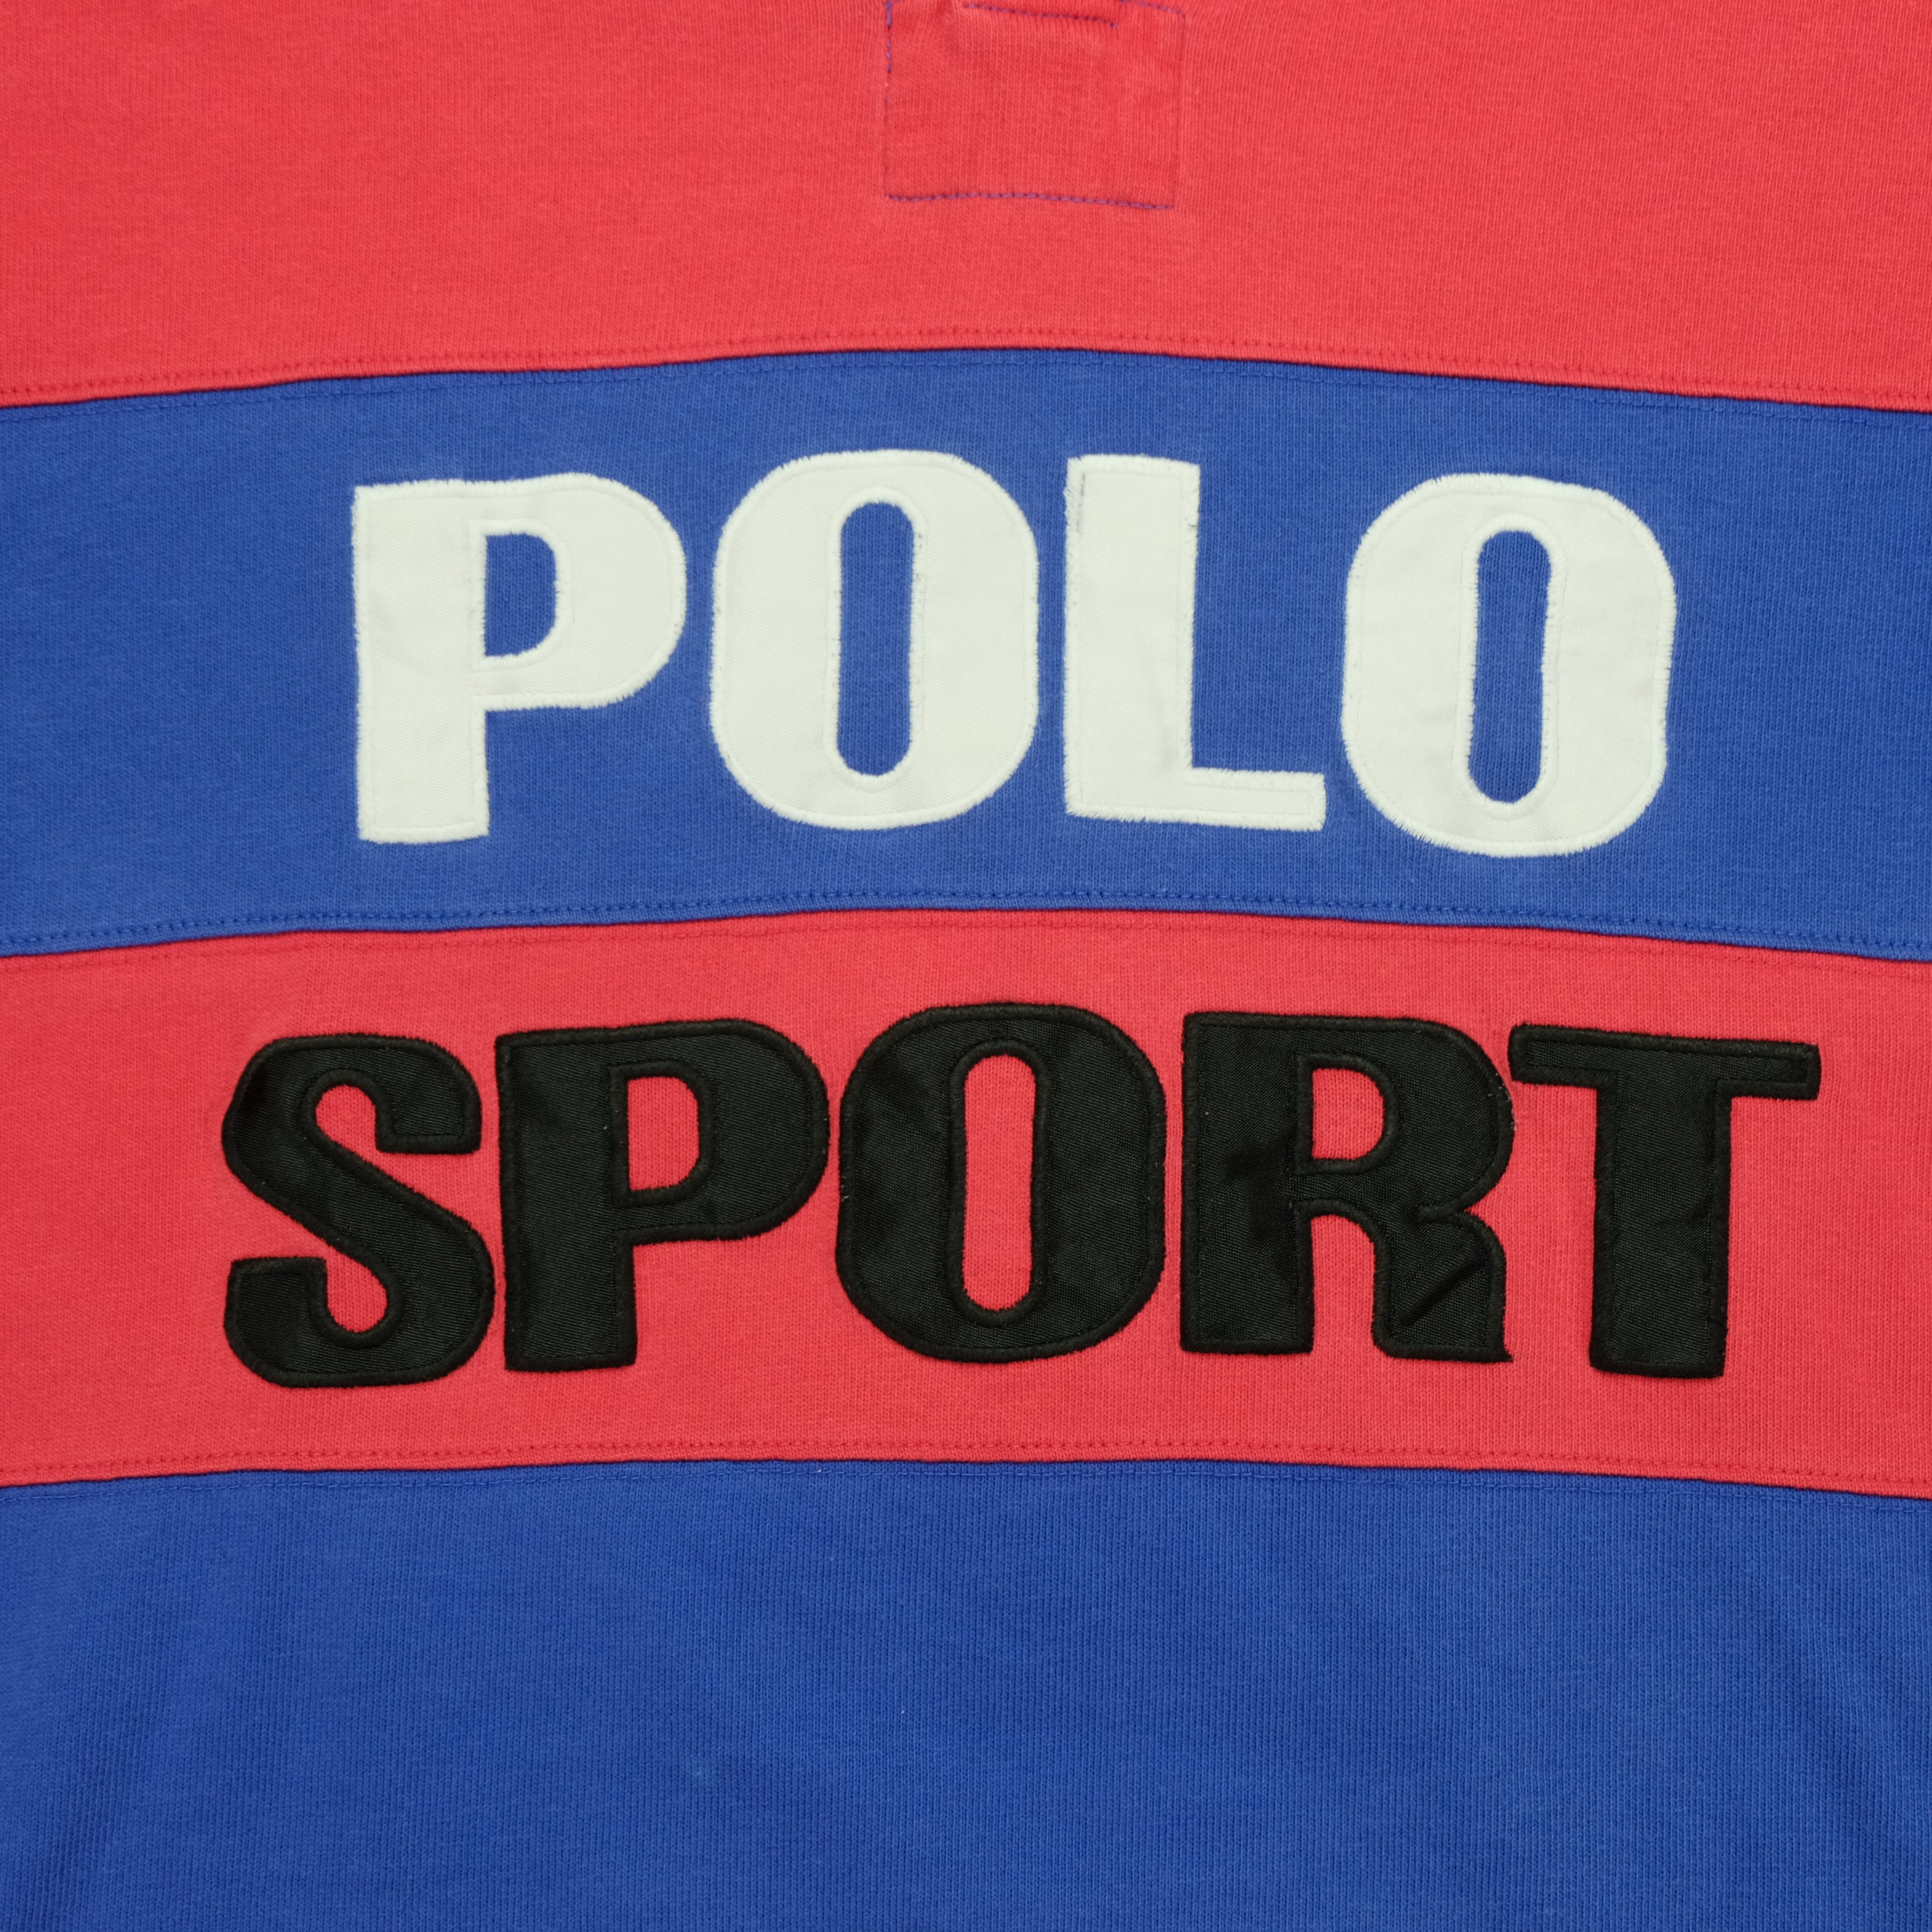 Vintage Polo Sport Ralph Lauren Spell Out Striped Rugby Shirt, Reset  Vintage Shirts, BUY • SELL • TRADE